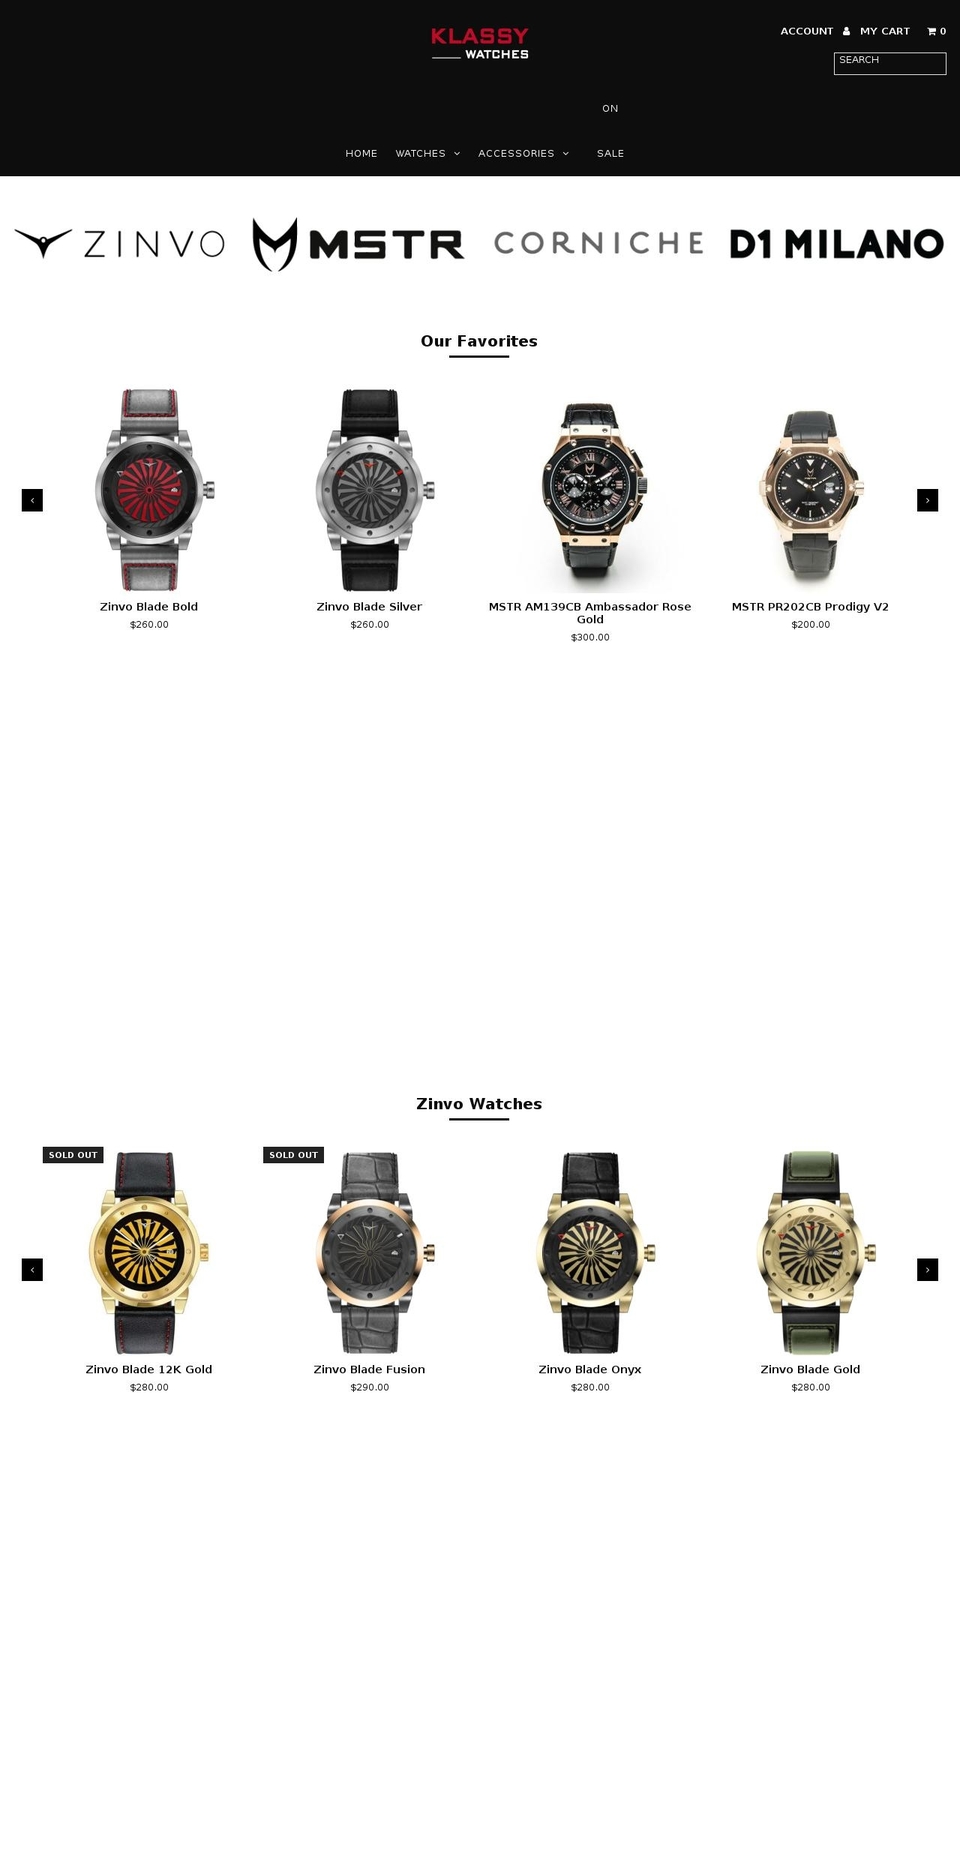 WATCHES Shopify theme site example klassywatches.com